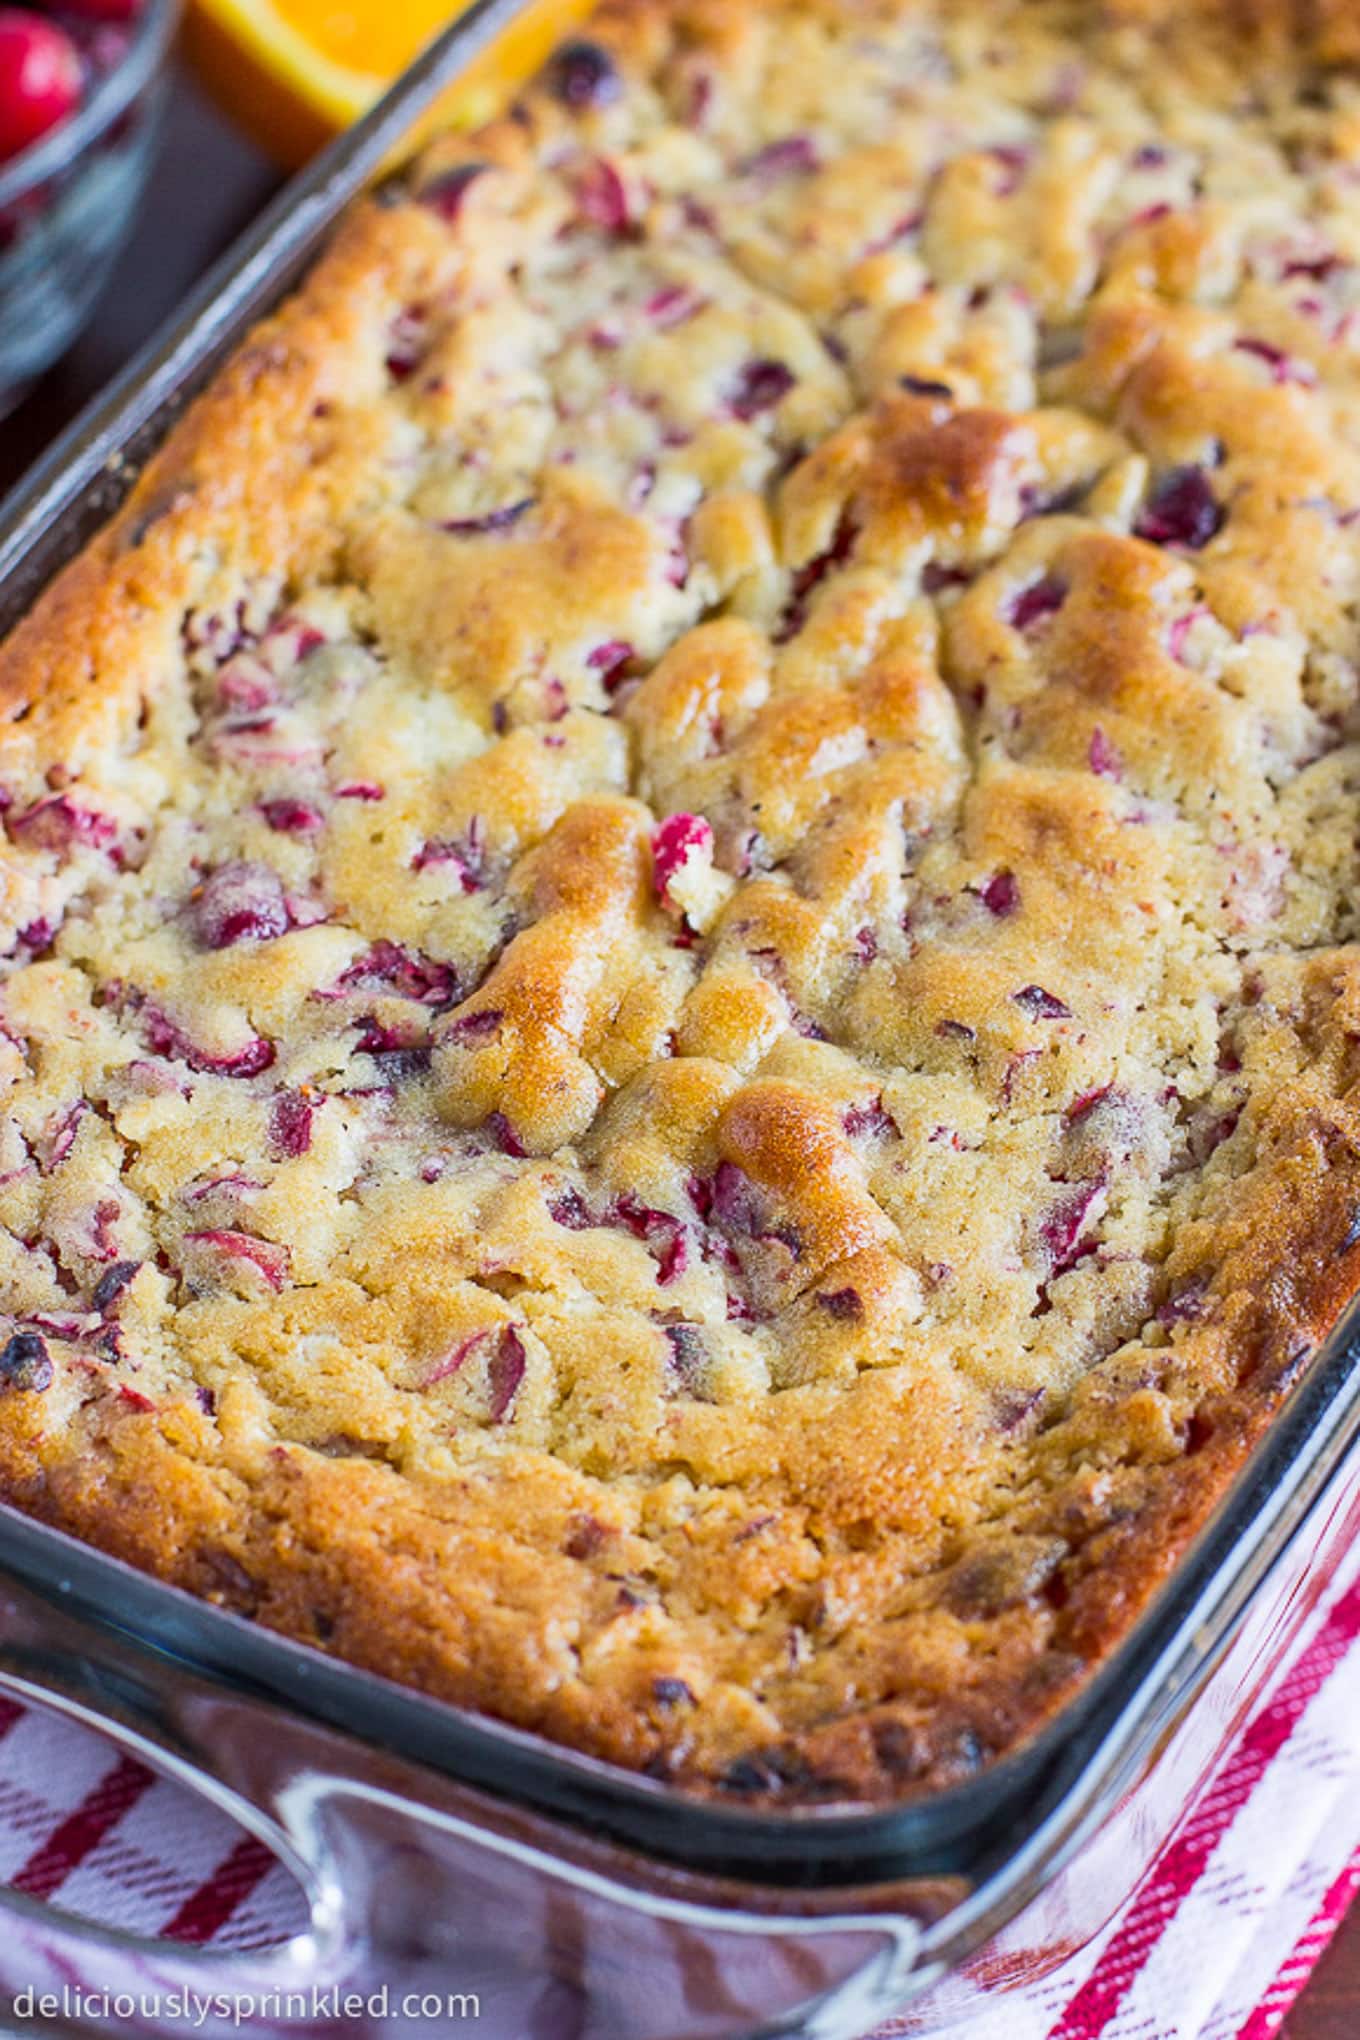 The top of a cranberry orange loaf cake after baking in the oven.